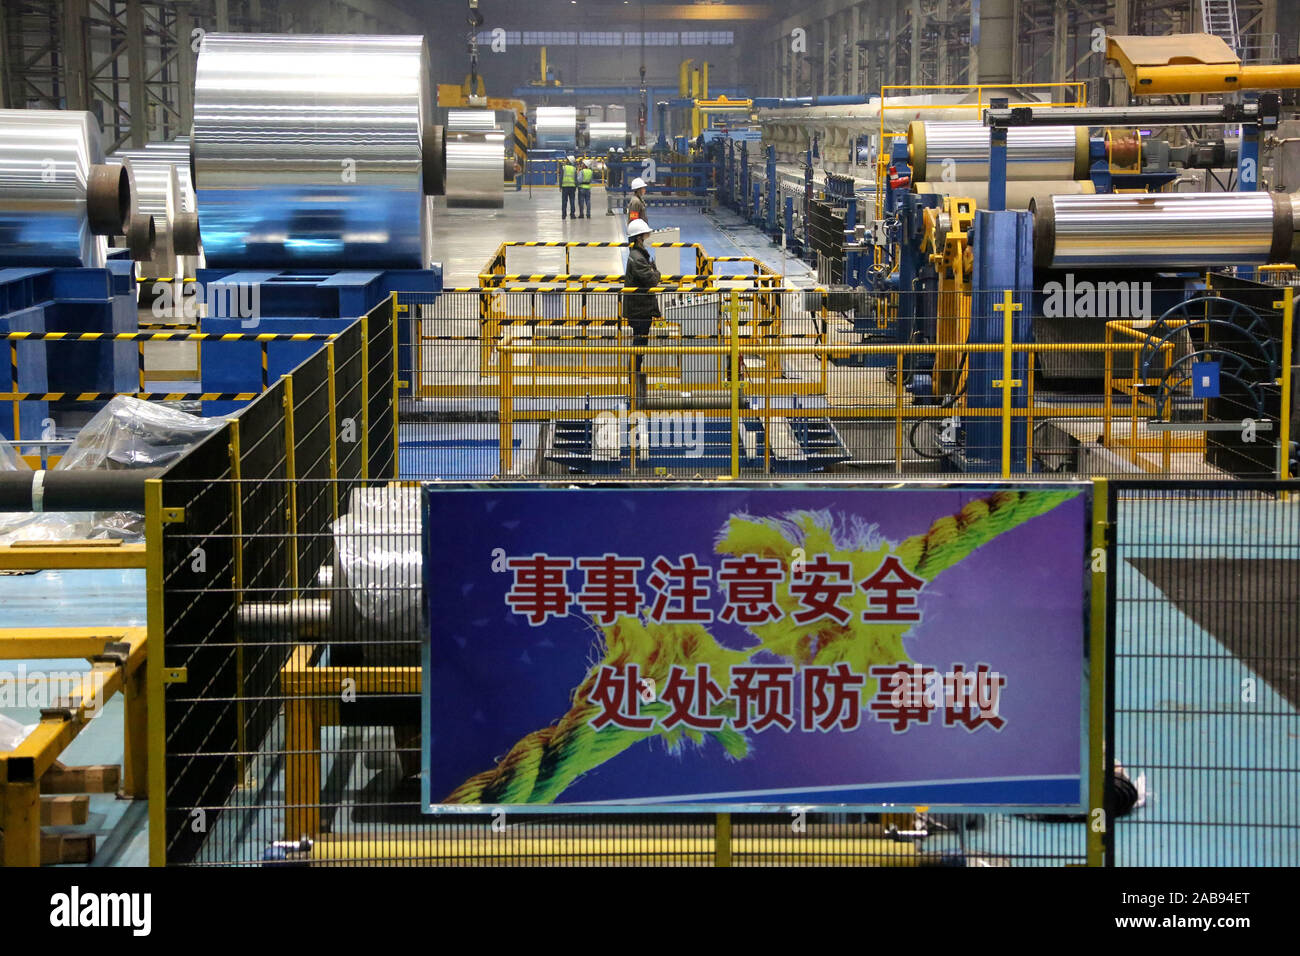 Chinese workers watch the production of coiled aluminium sheet at the plant of Zouping Hongfa Aluminium Technology Co., Ltd. in Zouping City, east Chi Stock Photo